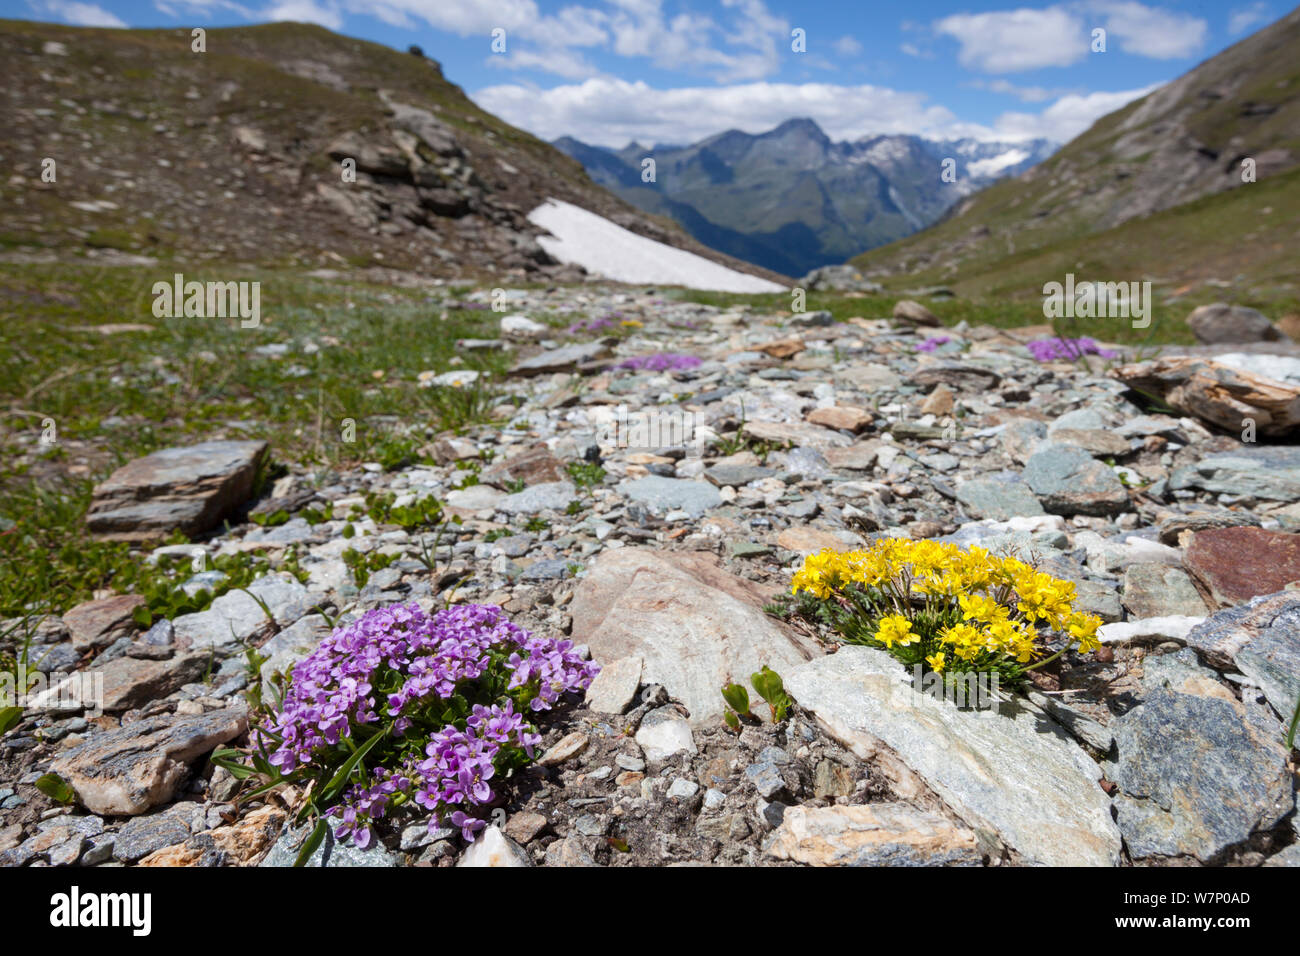 Round-leaved Penny Cress (Thlaspi rotundiflora) and yellow Whitlow Grass (Draba hoppeana) in flower on rocky plane at 2500 metres altitude in the Aosta Valley, Monte Rosa Massif, Pennine Alps, Italy. July. Stock Photo